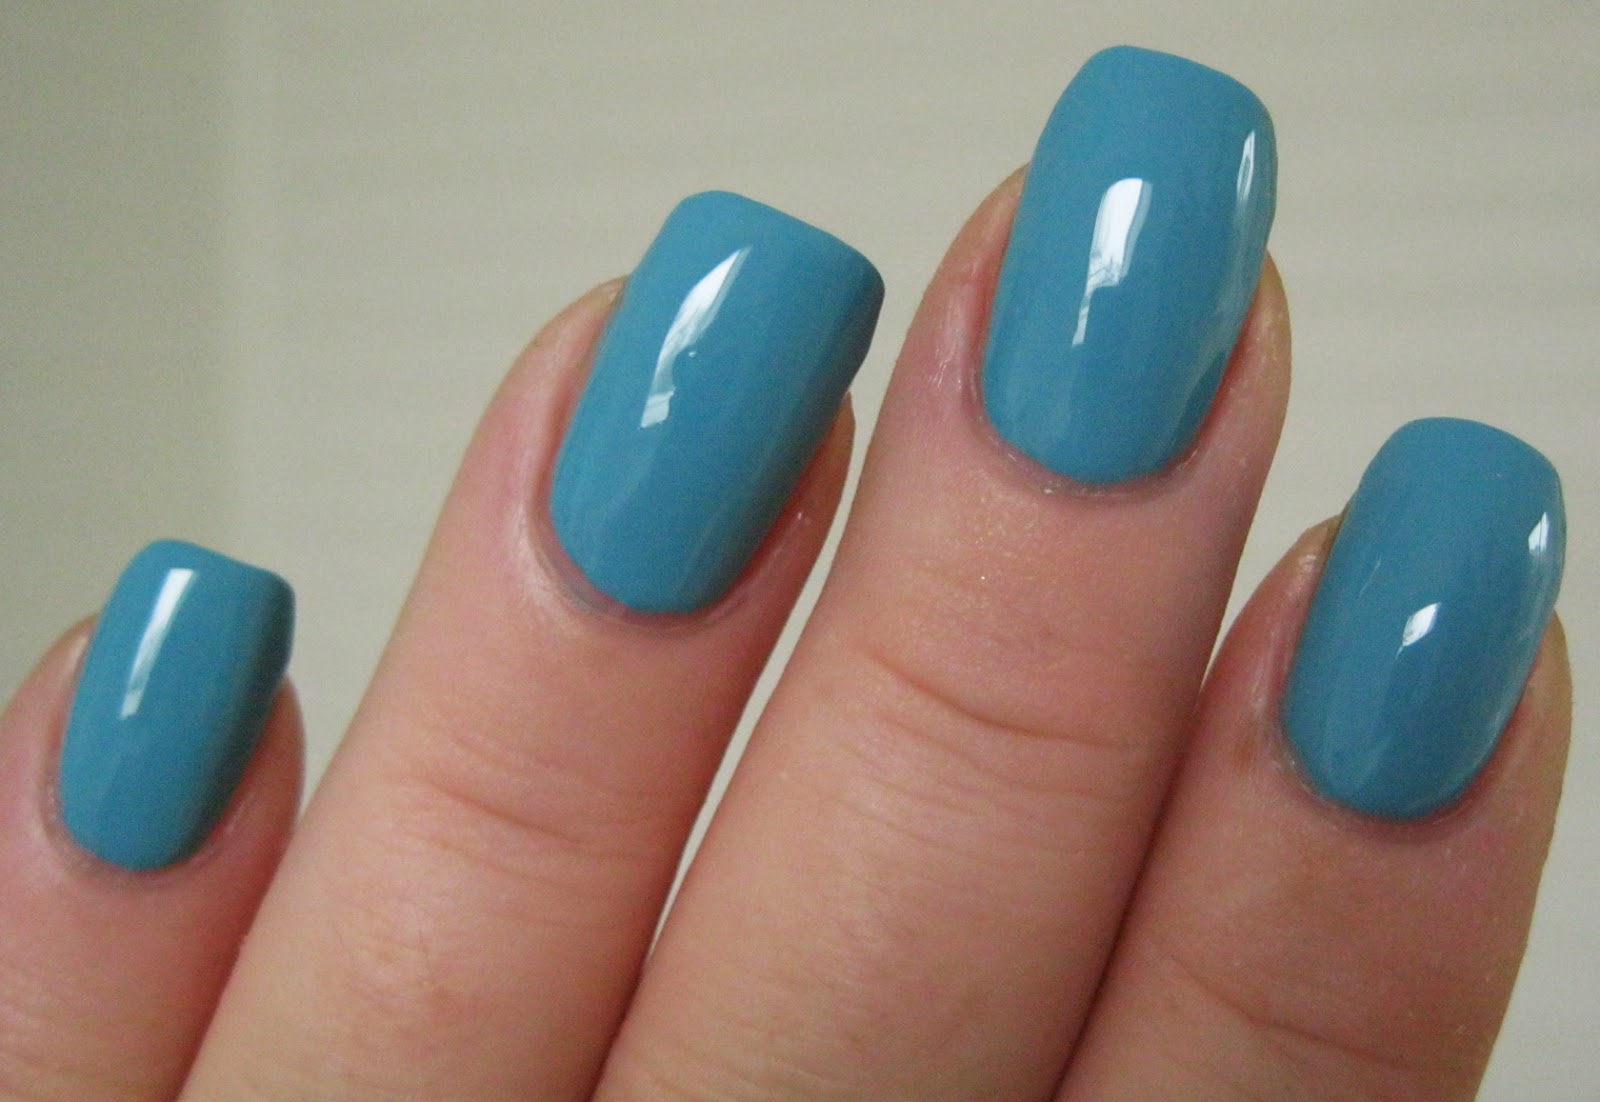 2. OPI Nail Lacquer in "Can't Find My Czechbook" - wide 8